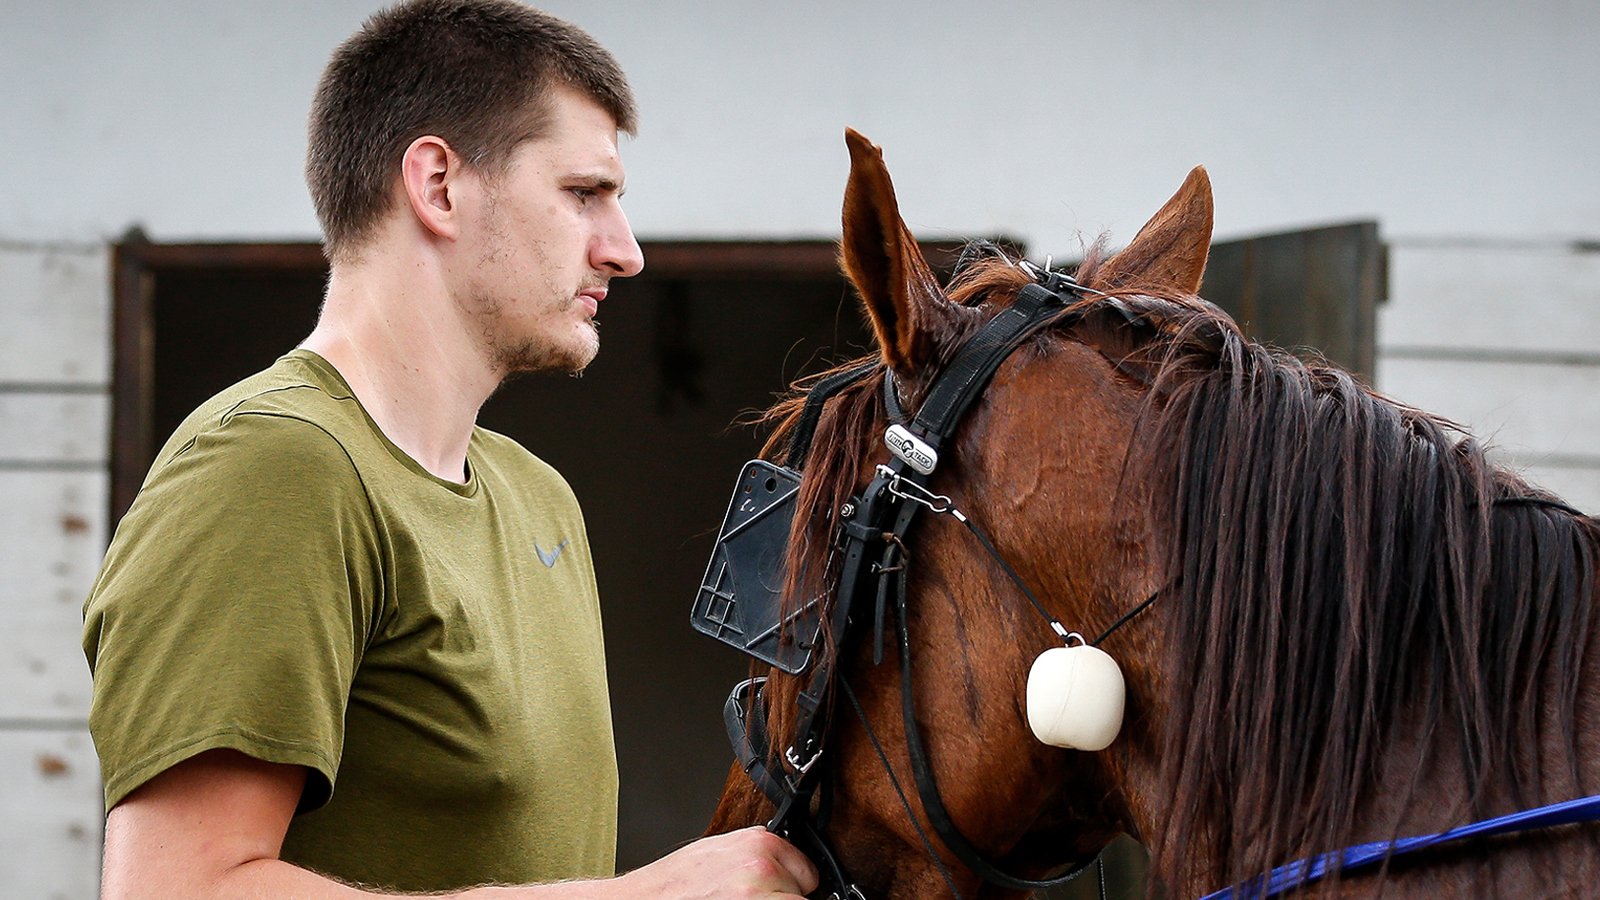 Video Of Nikola Jokic Scouting Horses On His Phone During Practice Proves The NBA Is Really Just His Side Hustle